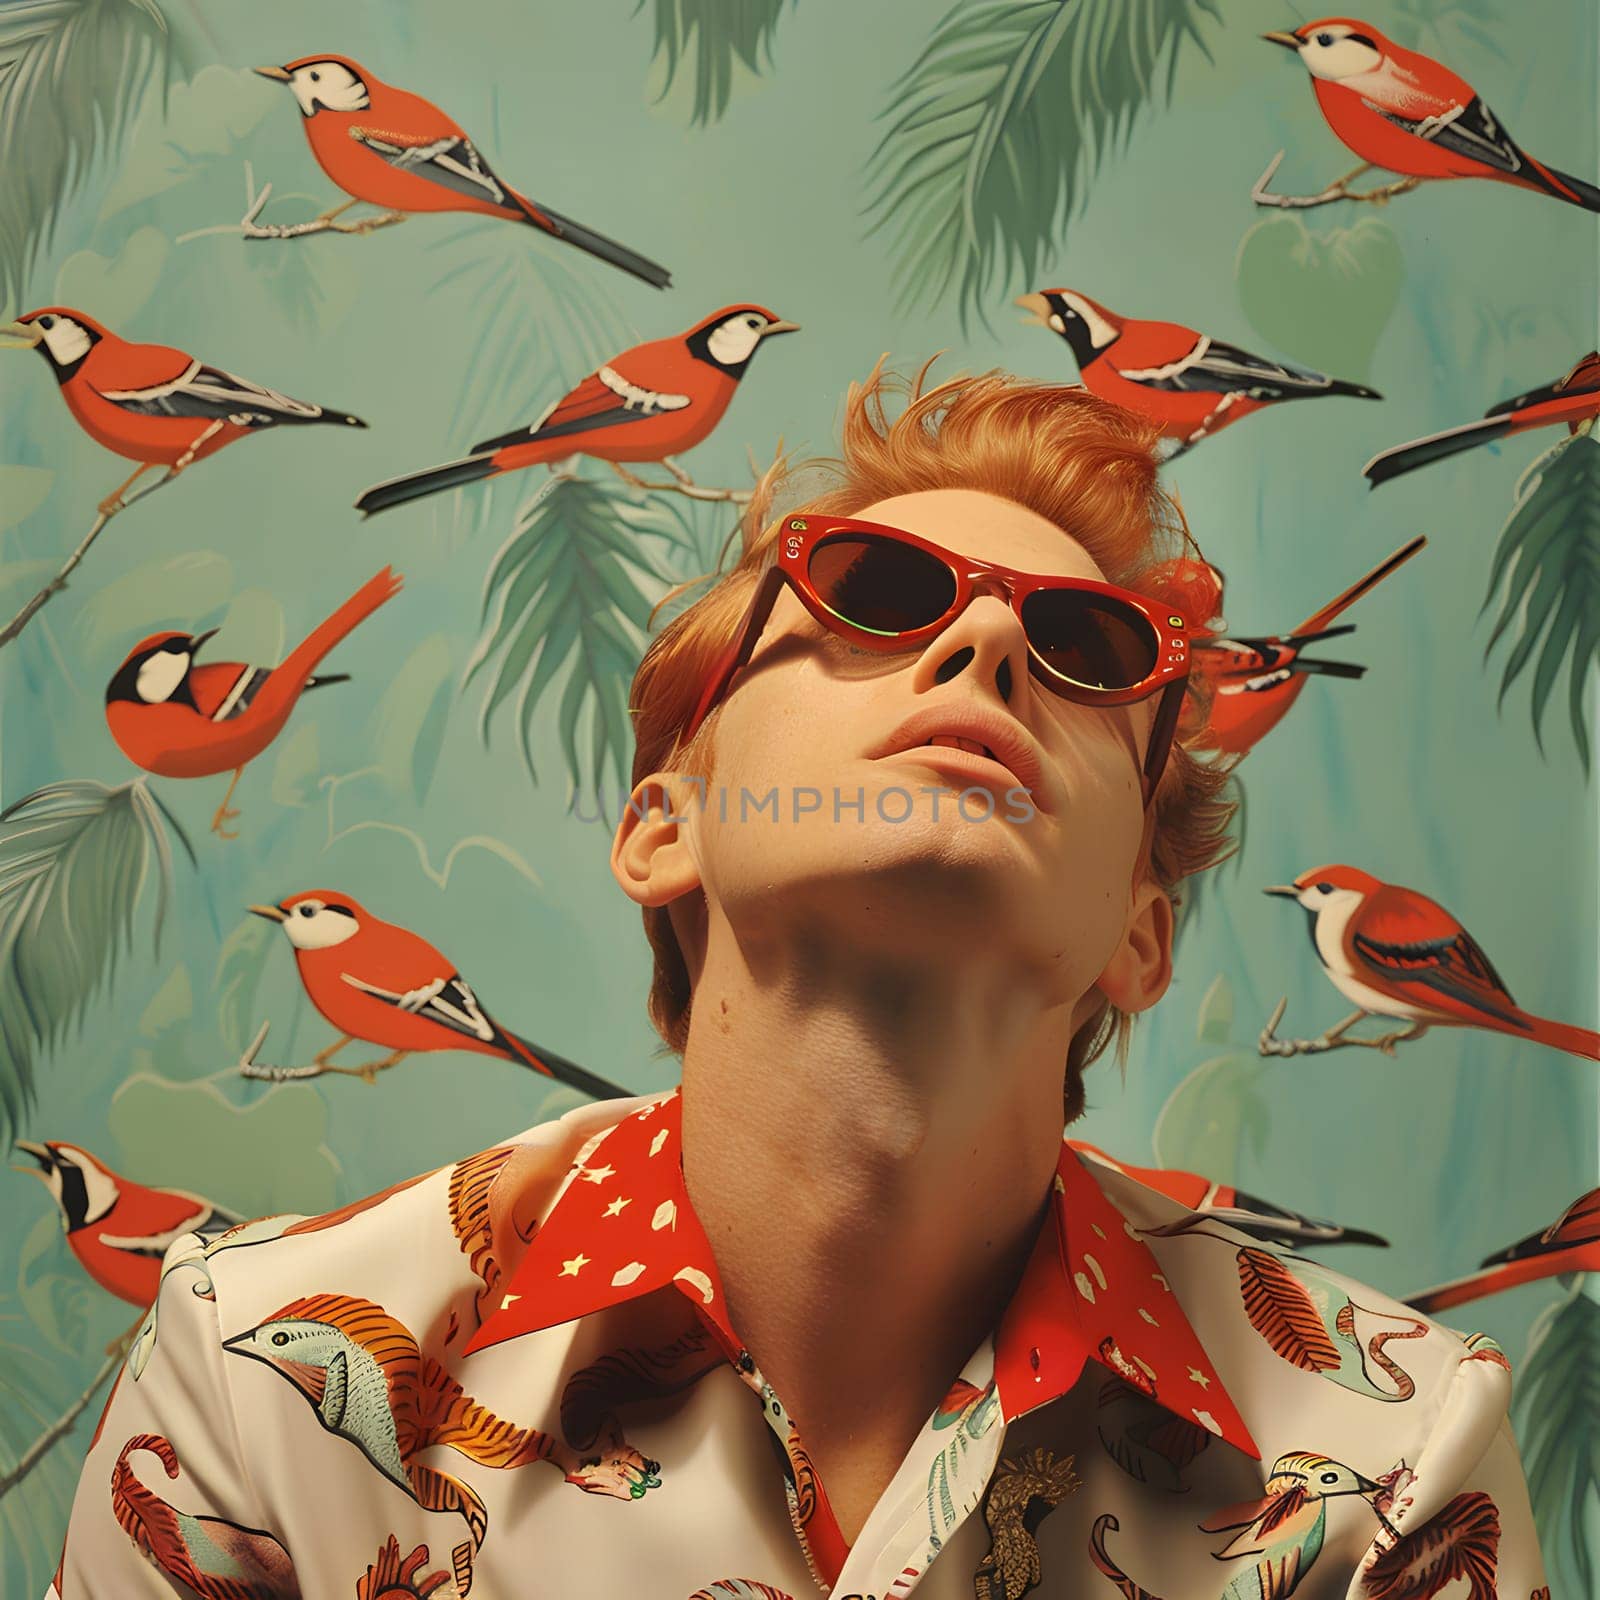 A man in avianthemed attire, wearing sunglasses, exemplifying a blend of fashion and art through his creative choice of eyewear and clothing